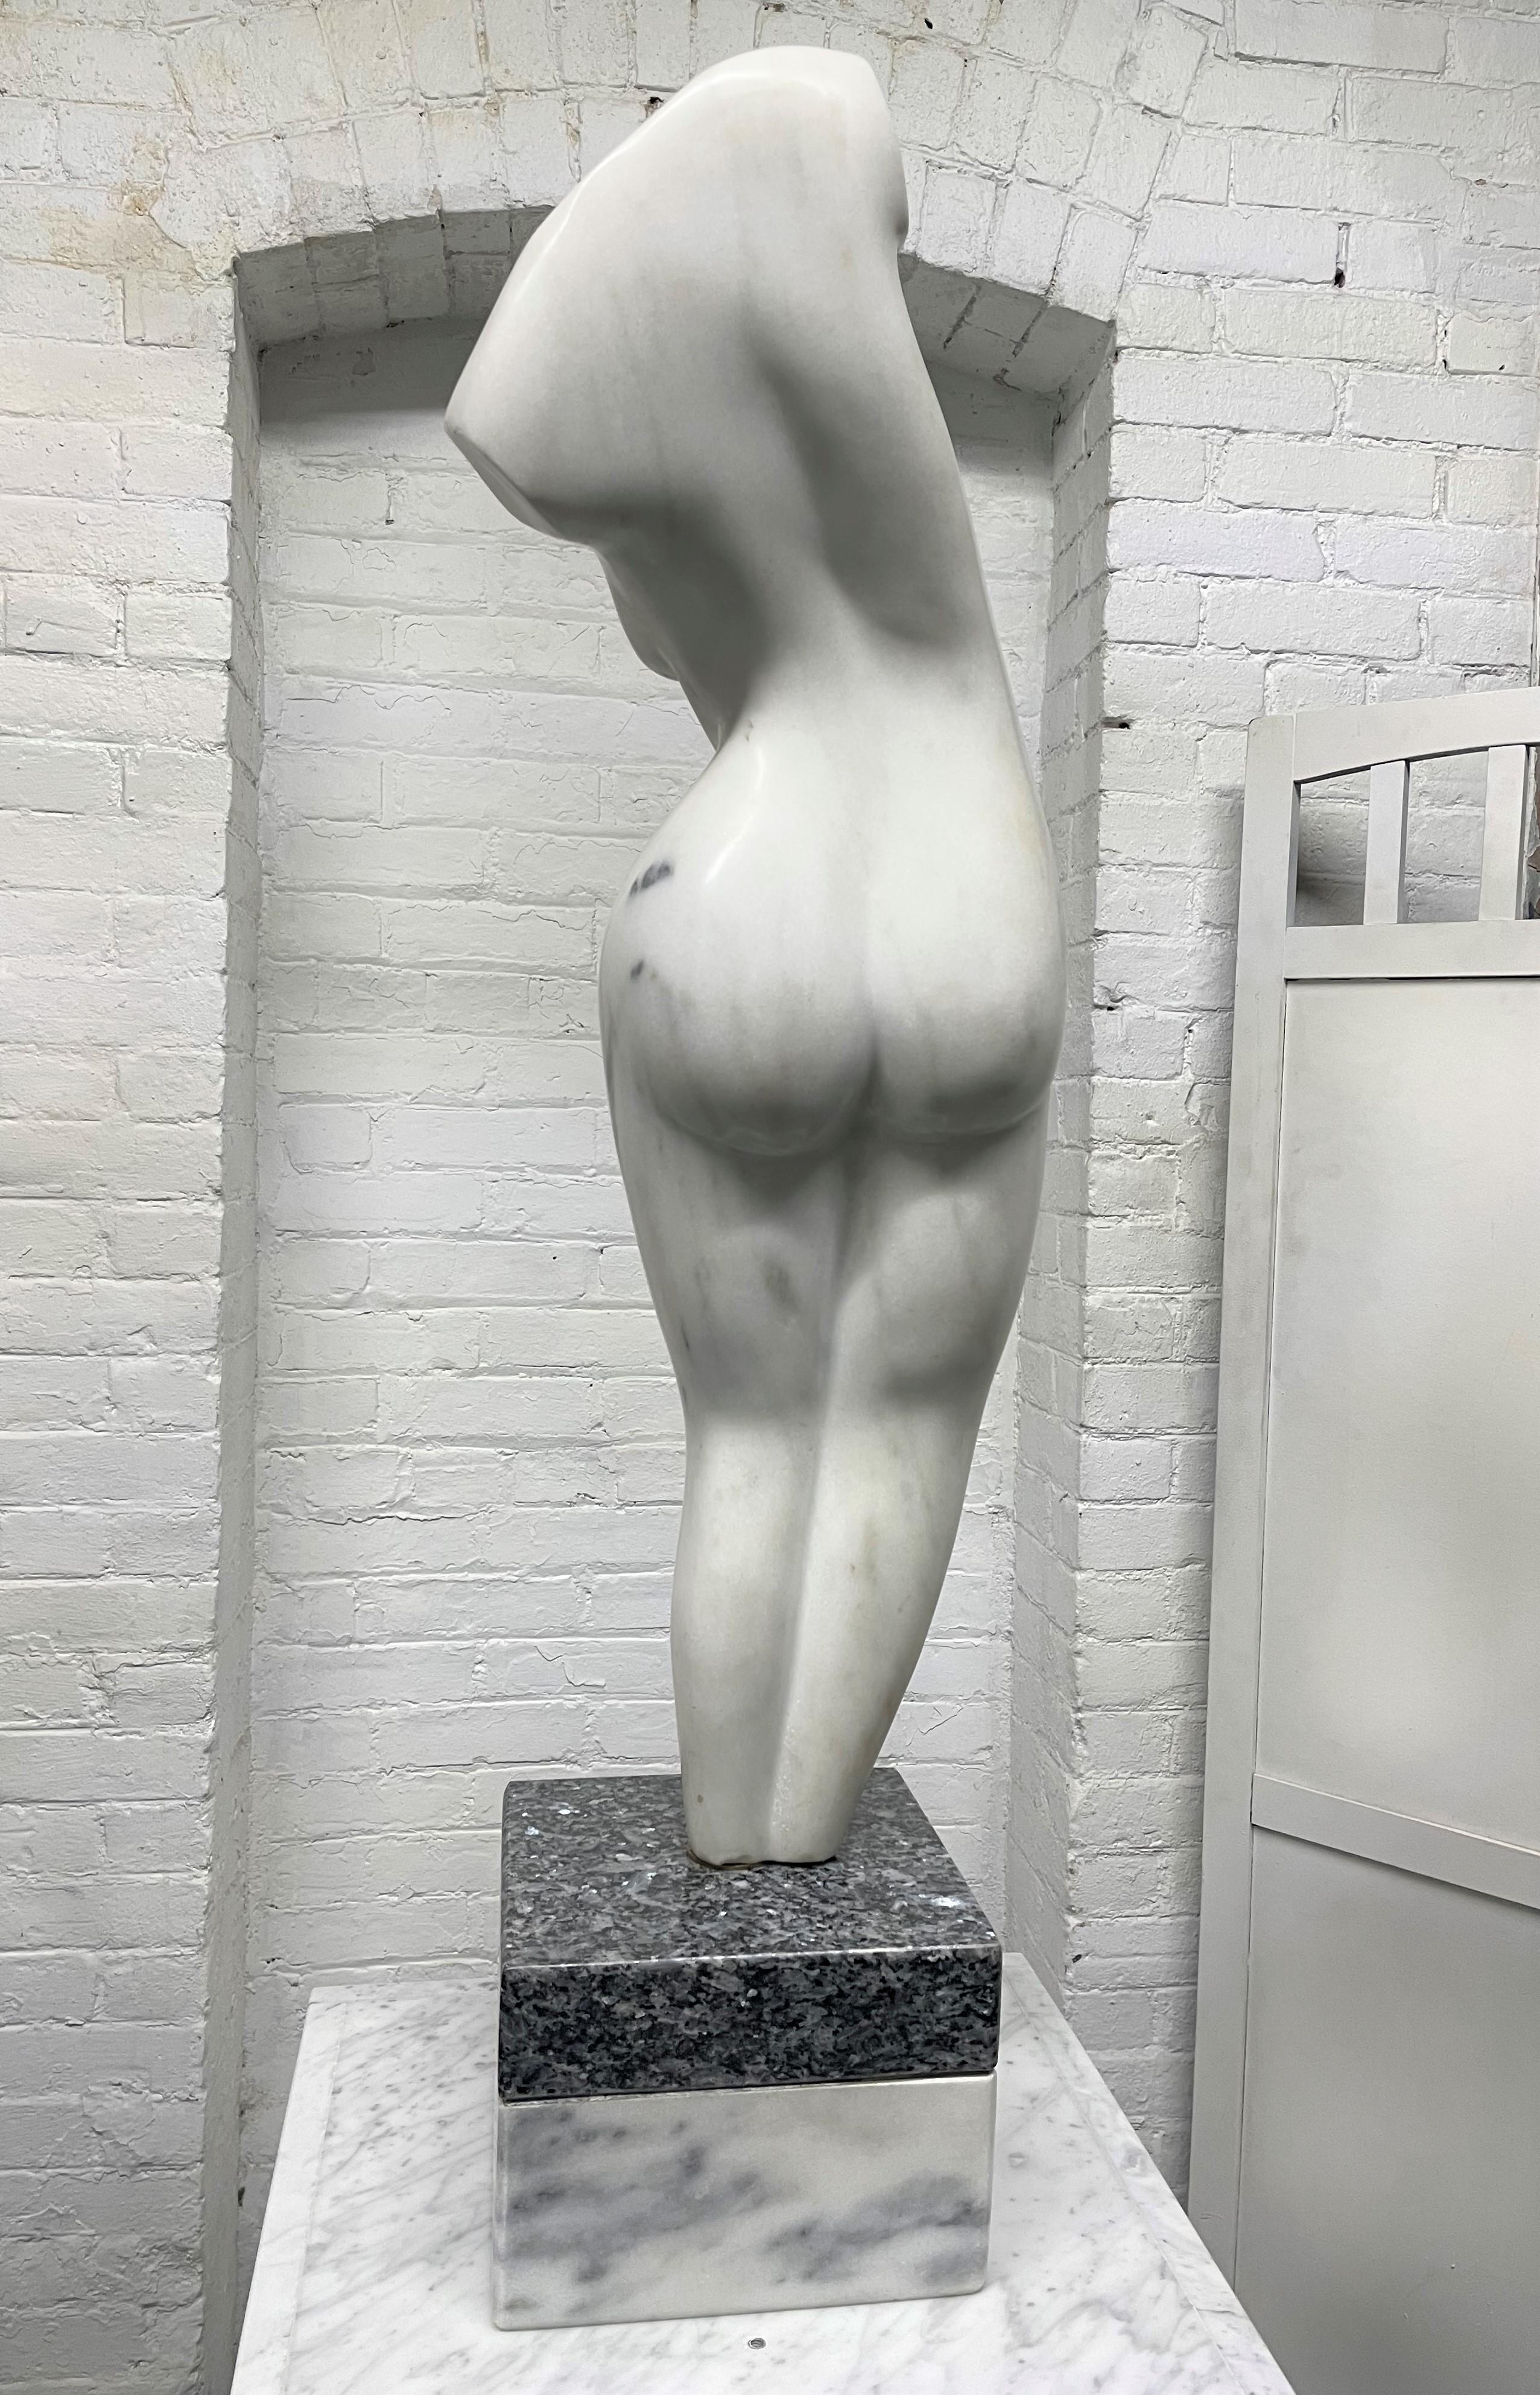 Tall, Italian Carrara marble female sculpture on pedestal. Date and signed on the back of the sculpture. The sculpture also swivels. The bottom base of the sculpture where it swivels is granite.